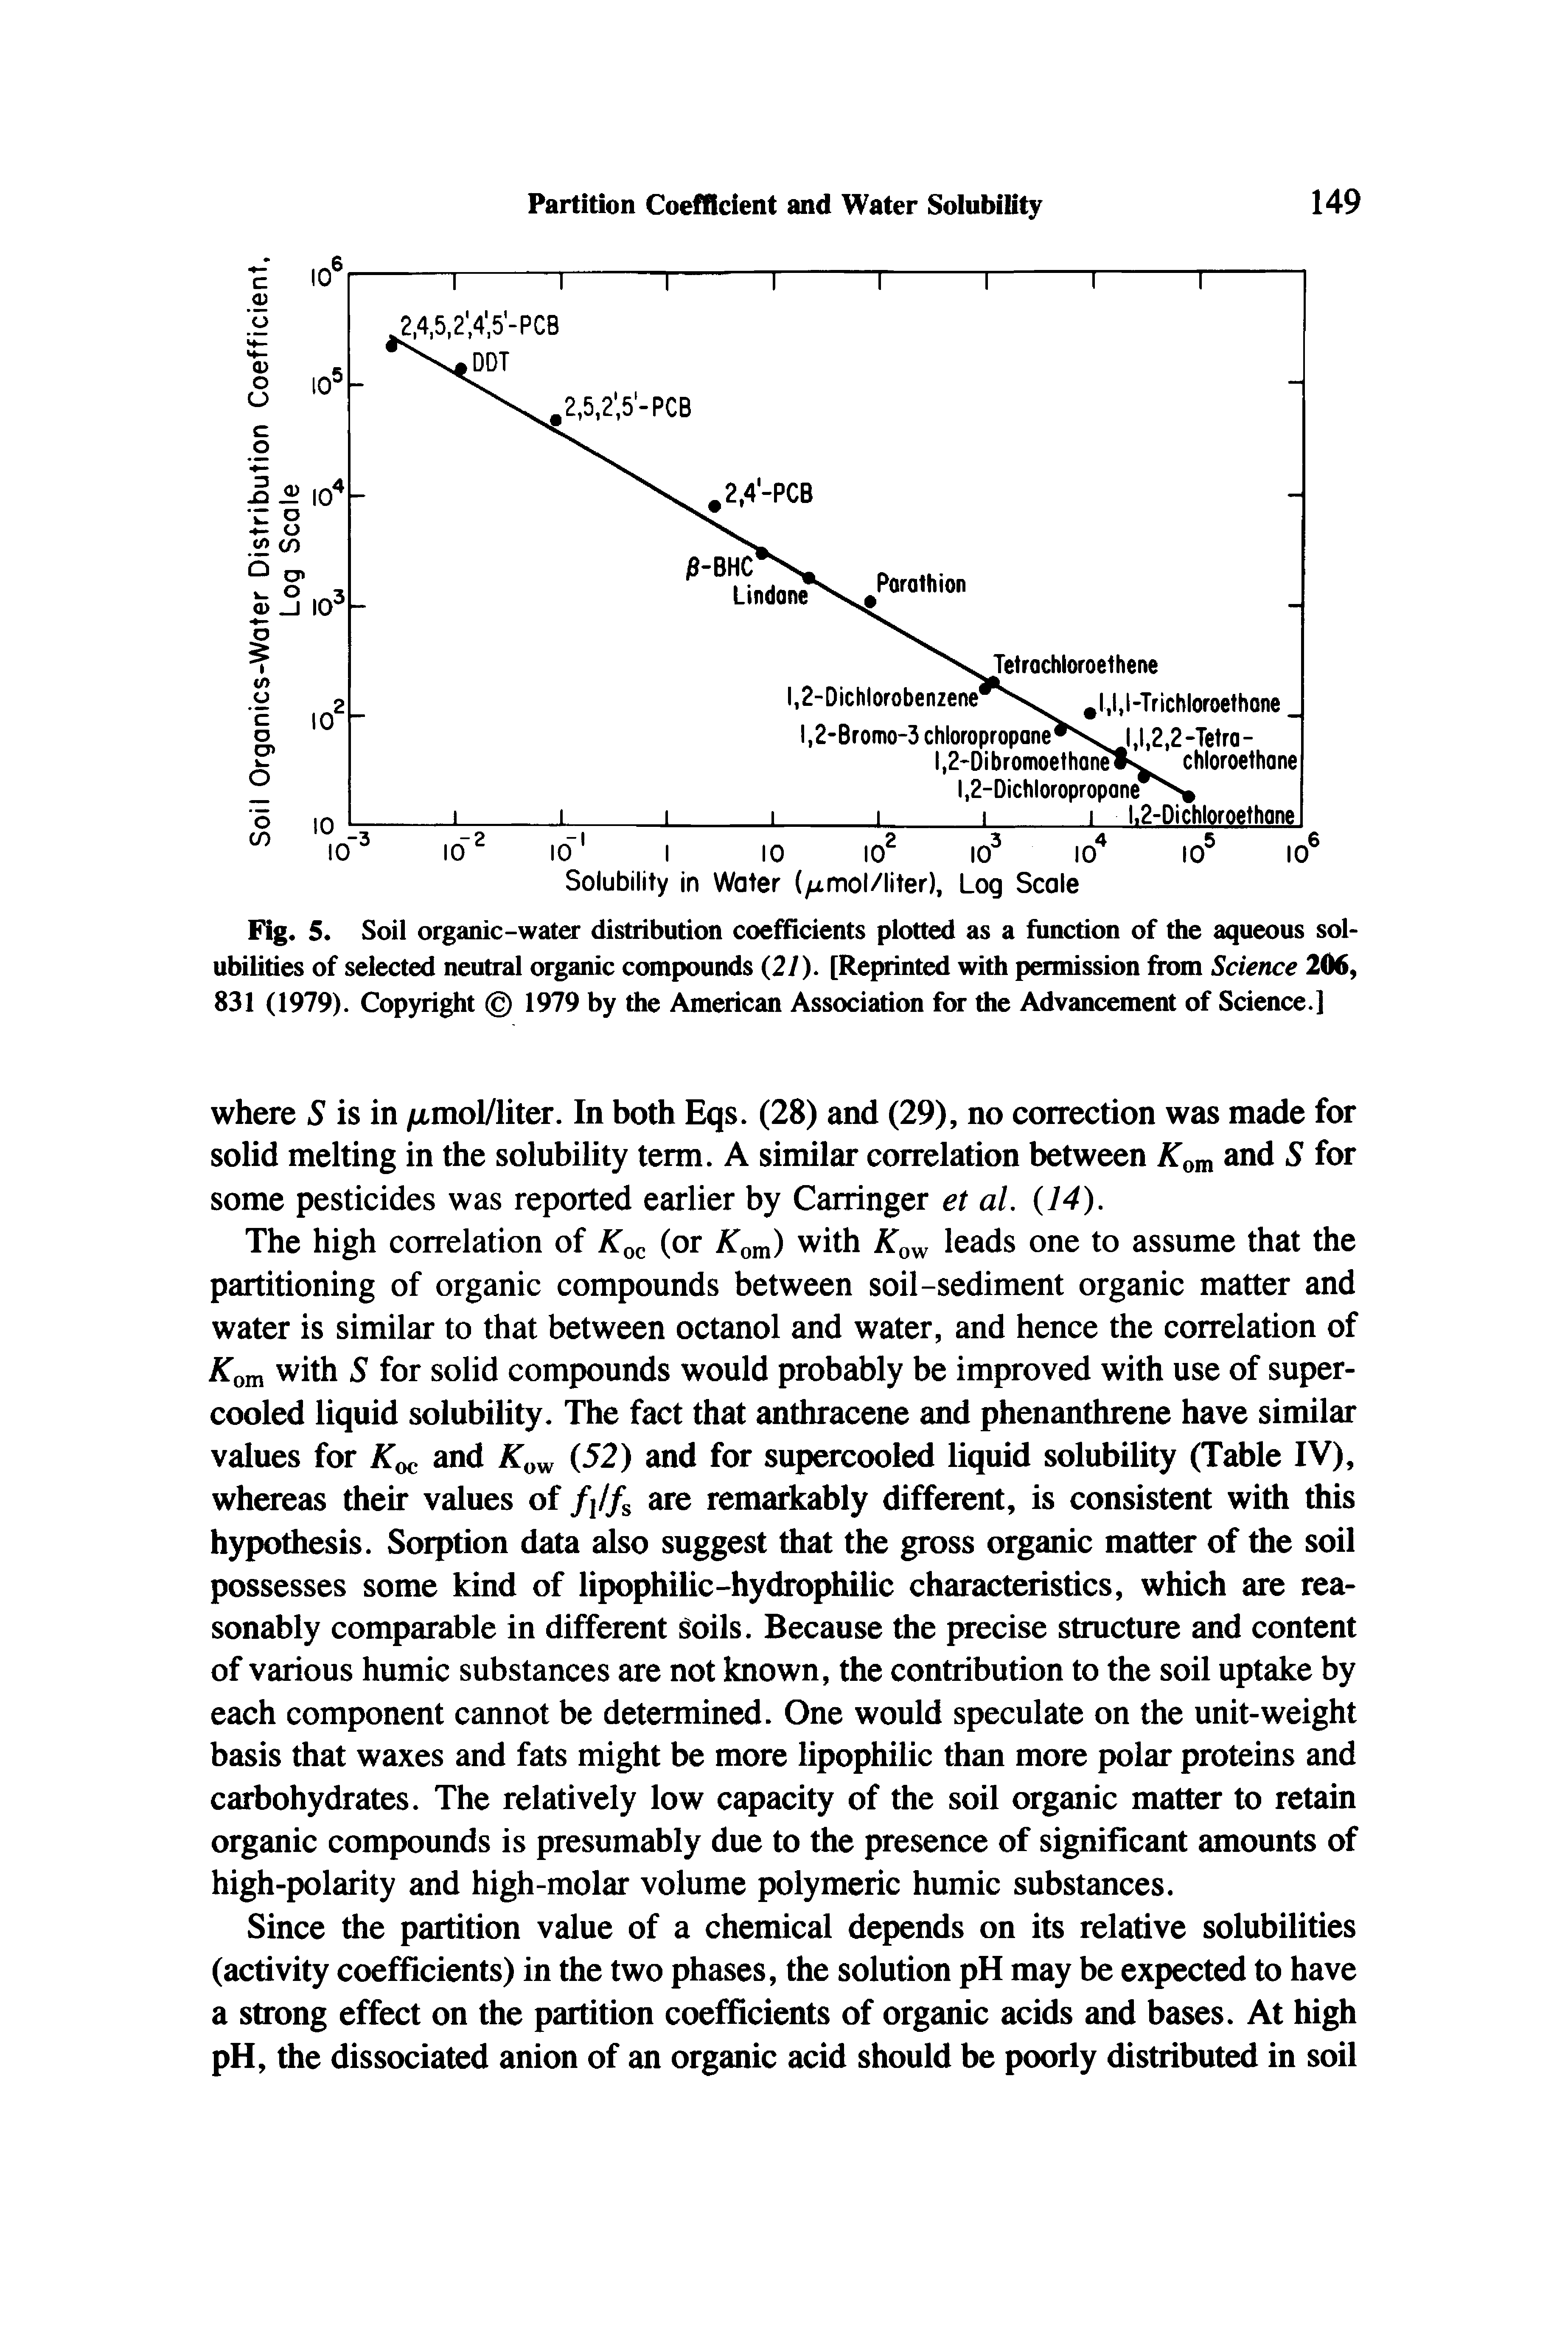 Fig. 5. Soil organic-water distribution coefficients plotted as a function of the aqueous sol> ubilities of selected neutral organic compounds (27). [Reprinted with permission from Science 206, 831 (1979). Copyright 1979 by the American Association for the Advancement of Science.]...